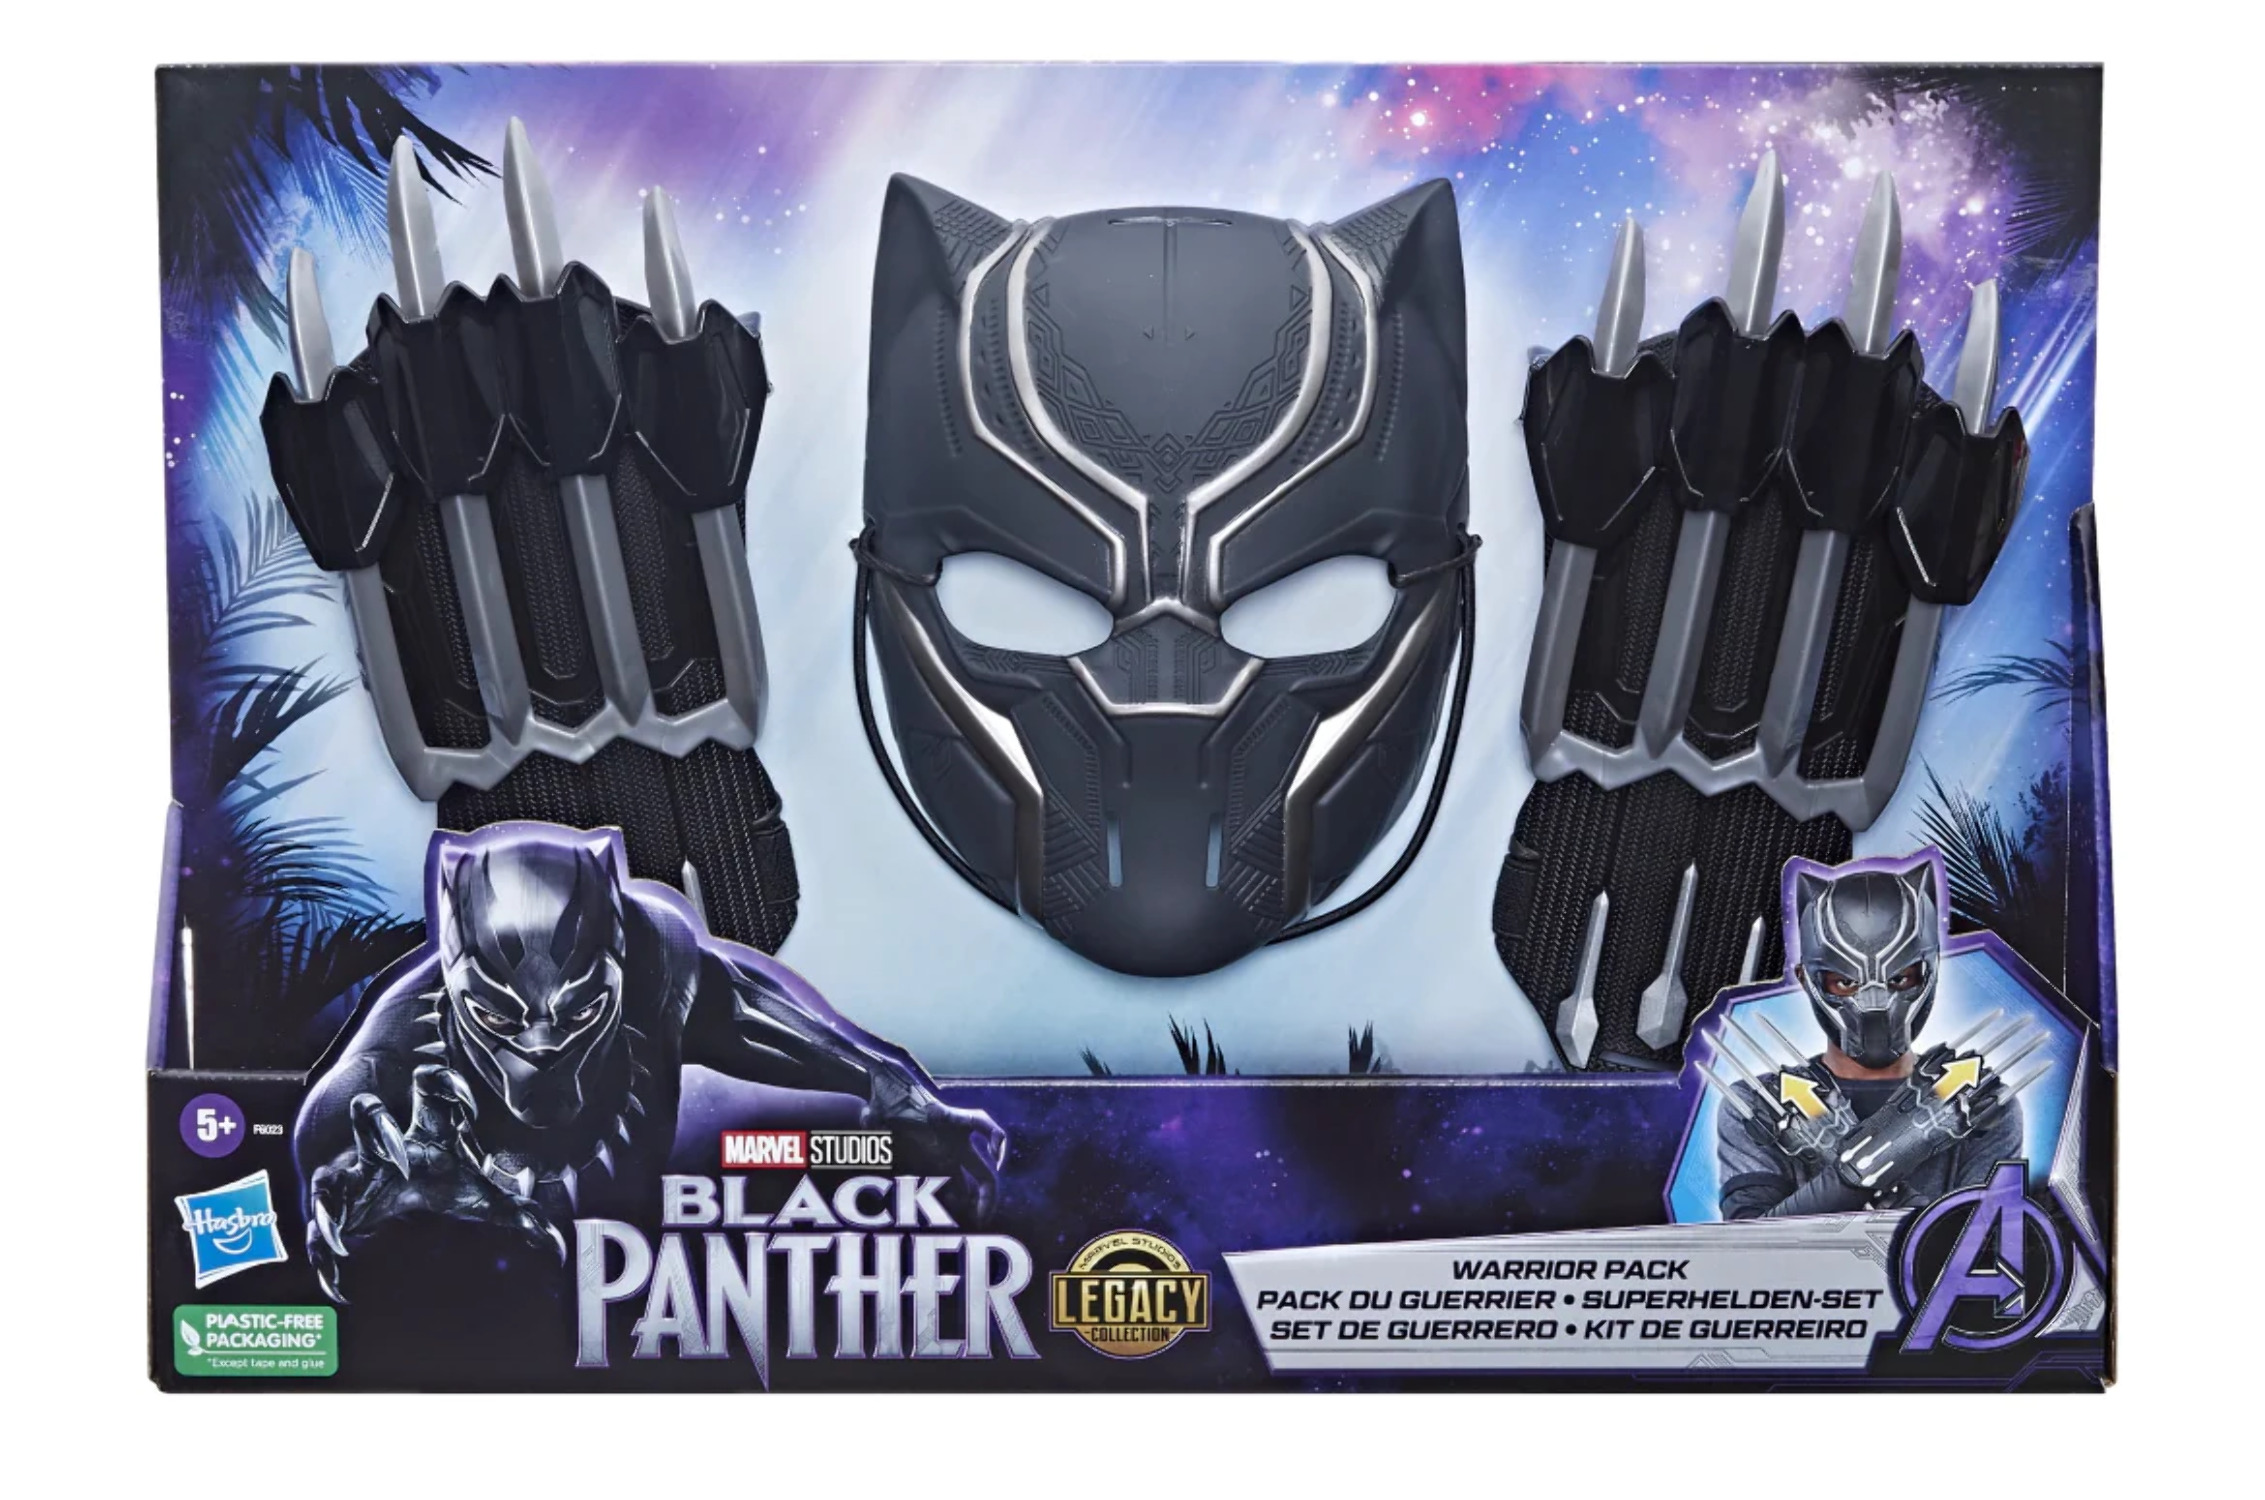 Marvel Studios' Black Panther Legacy Collection Warrior Pack, Mask and Claws Role Play Toy, Only at Walmart - image 3 of 12